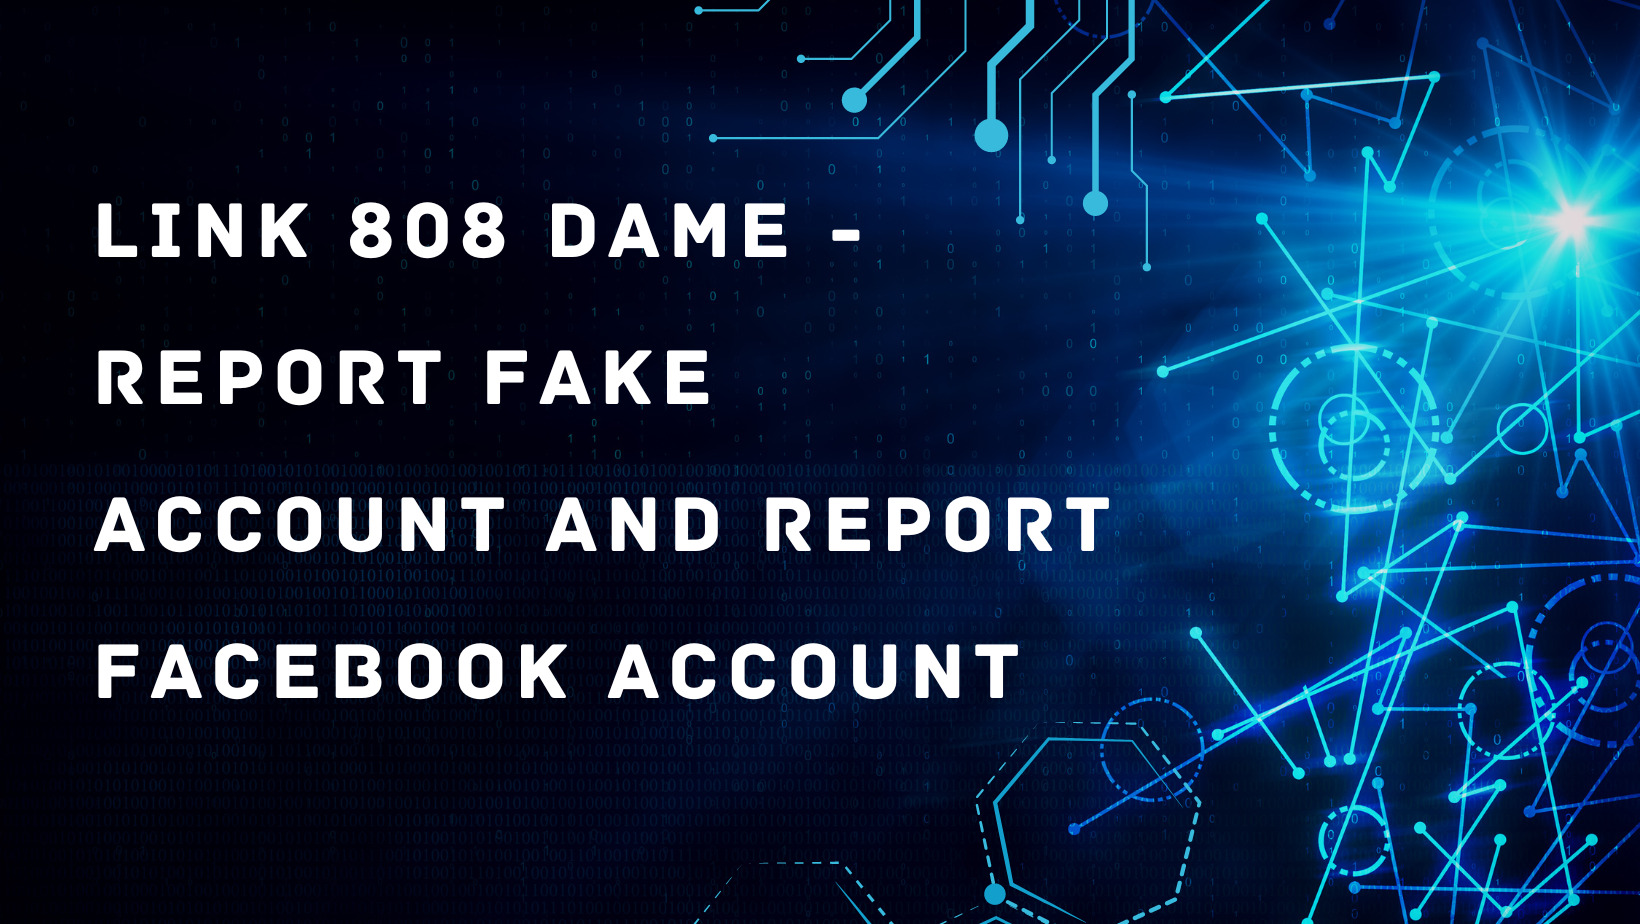 Link 808 dame – Report fake account and report Facebook account